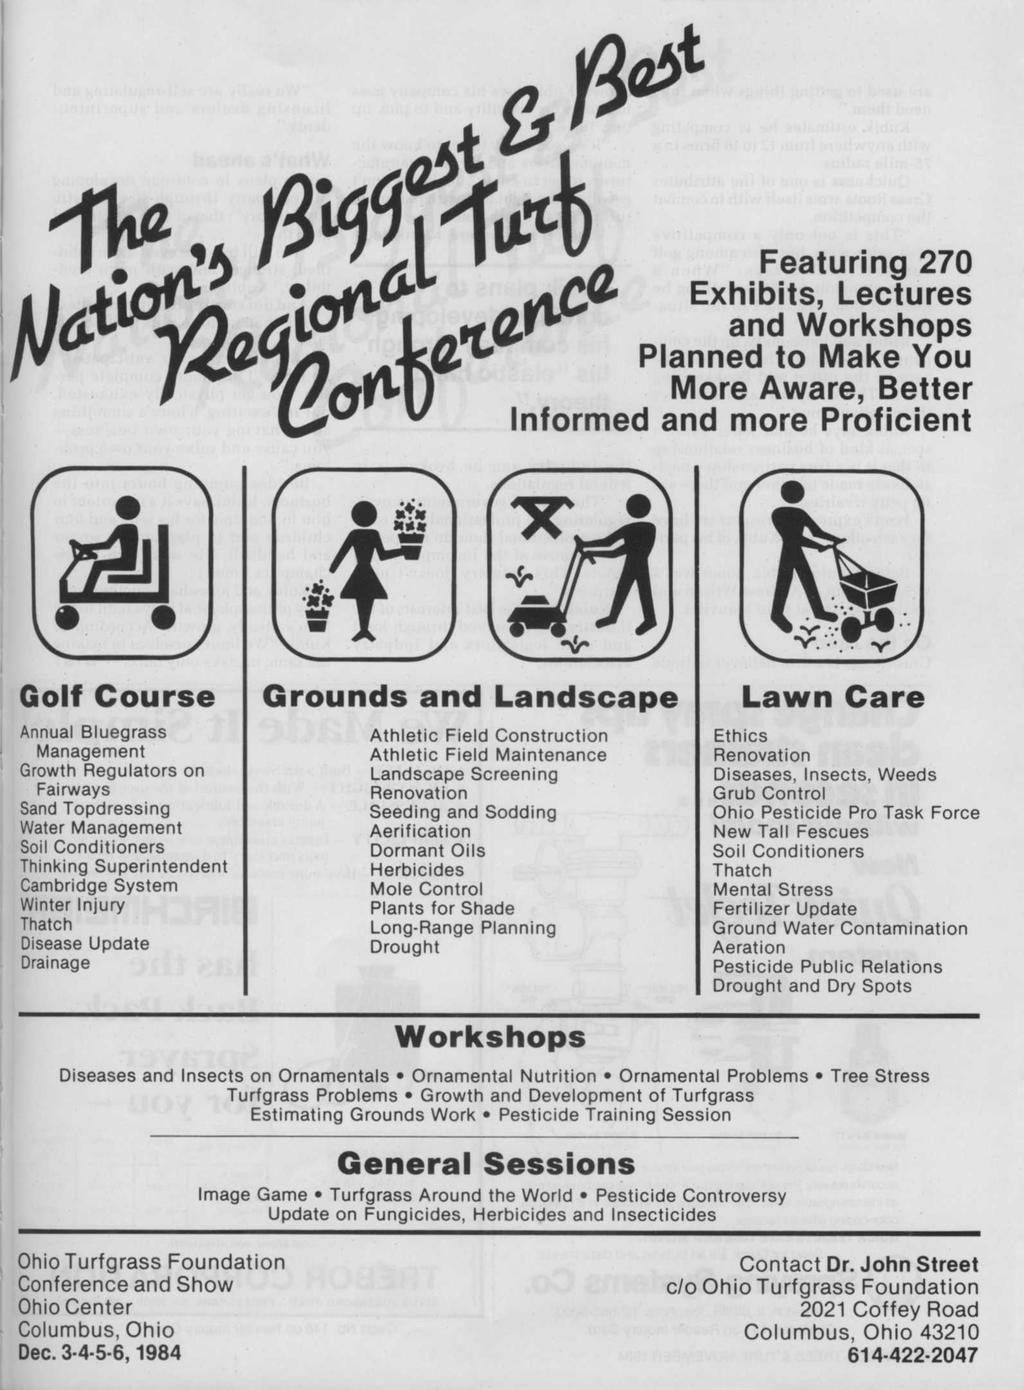 Featuring 270 Exhibits, Lectures and Workshops Planned to Make You More Aware, Better Informed and more Proficient»T* ft*«golf Course Annual Bluegrass Management Growth Regulators on Fairways Sand